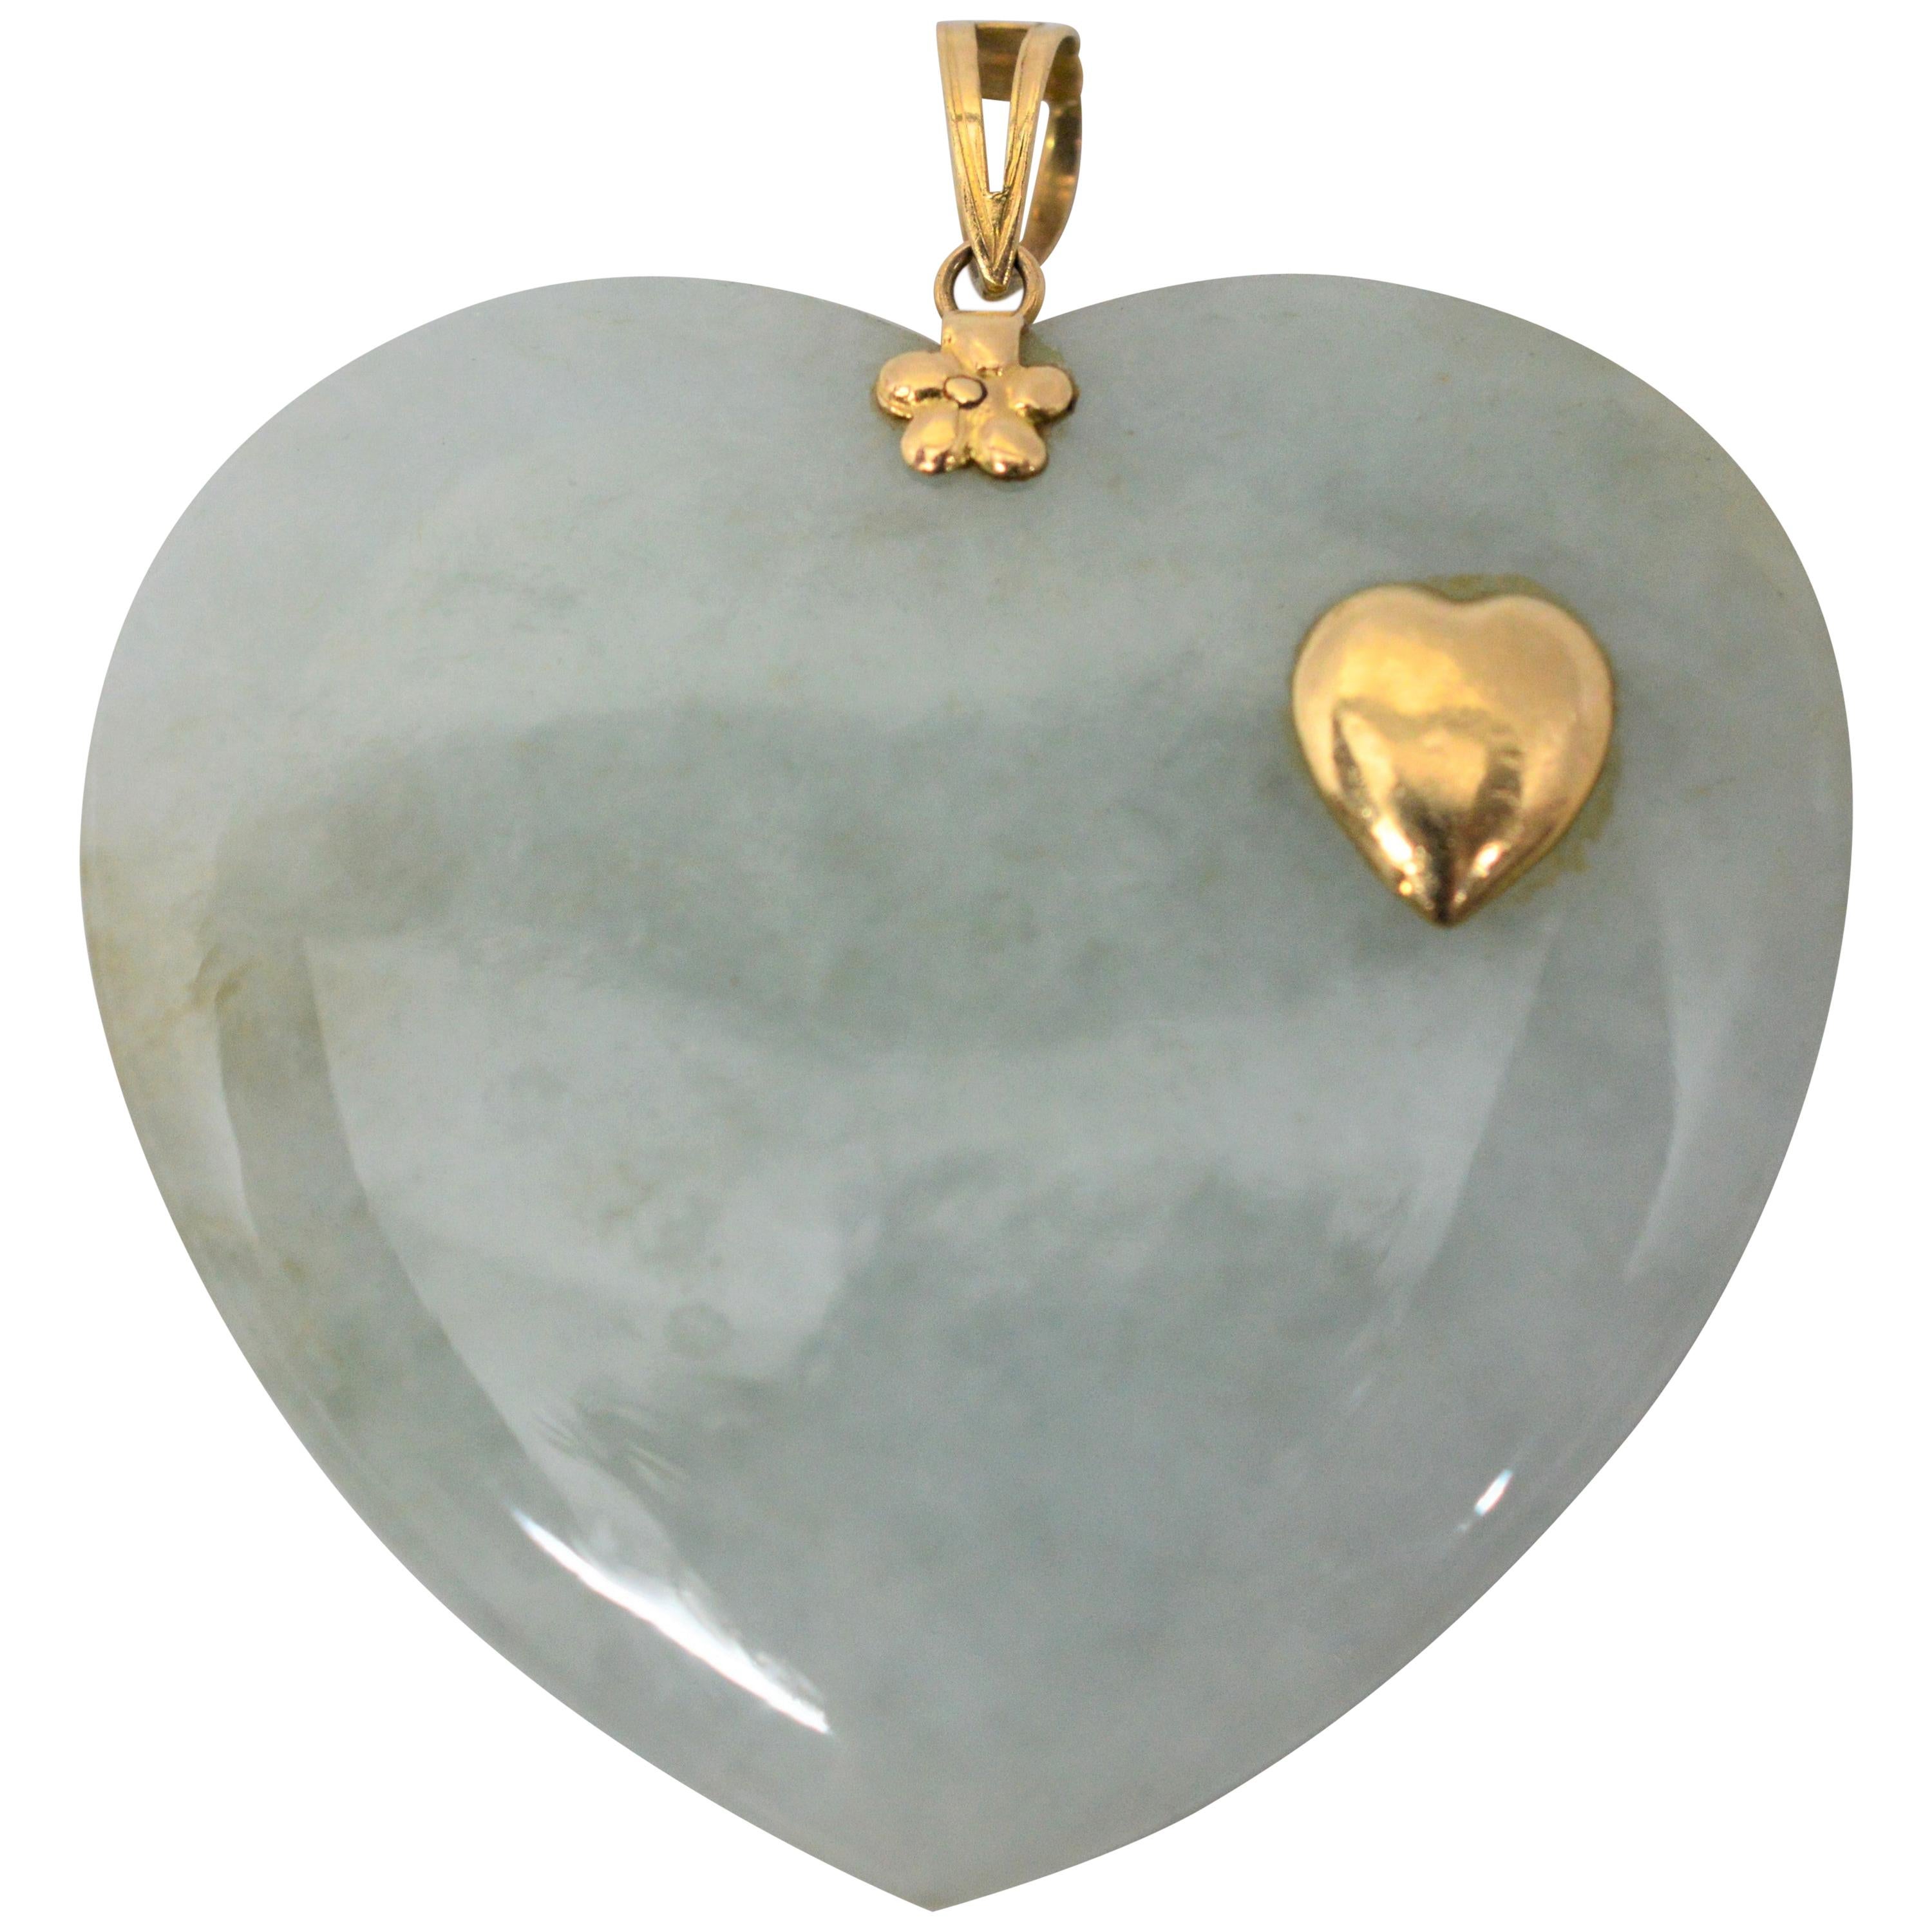 Jade Heart Pendant with 14 Karat Gold Accents